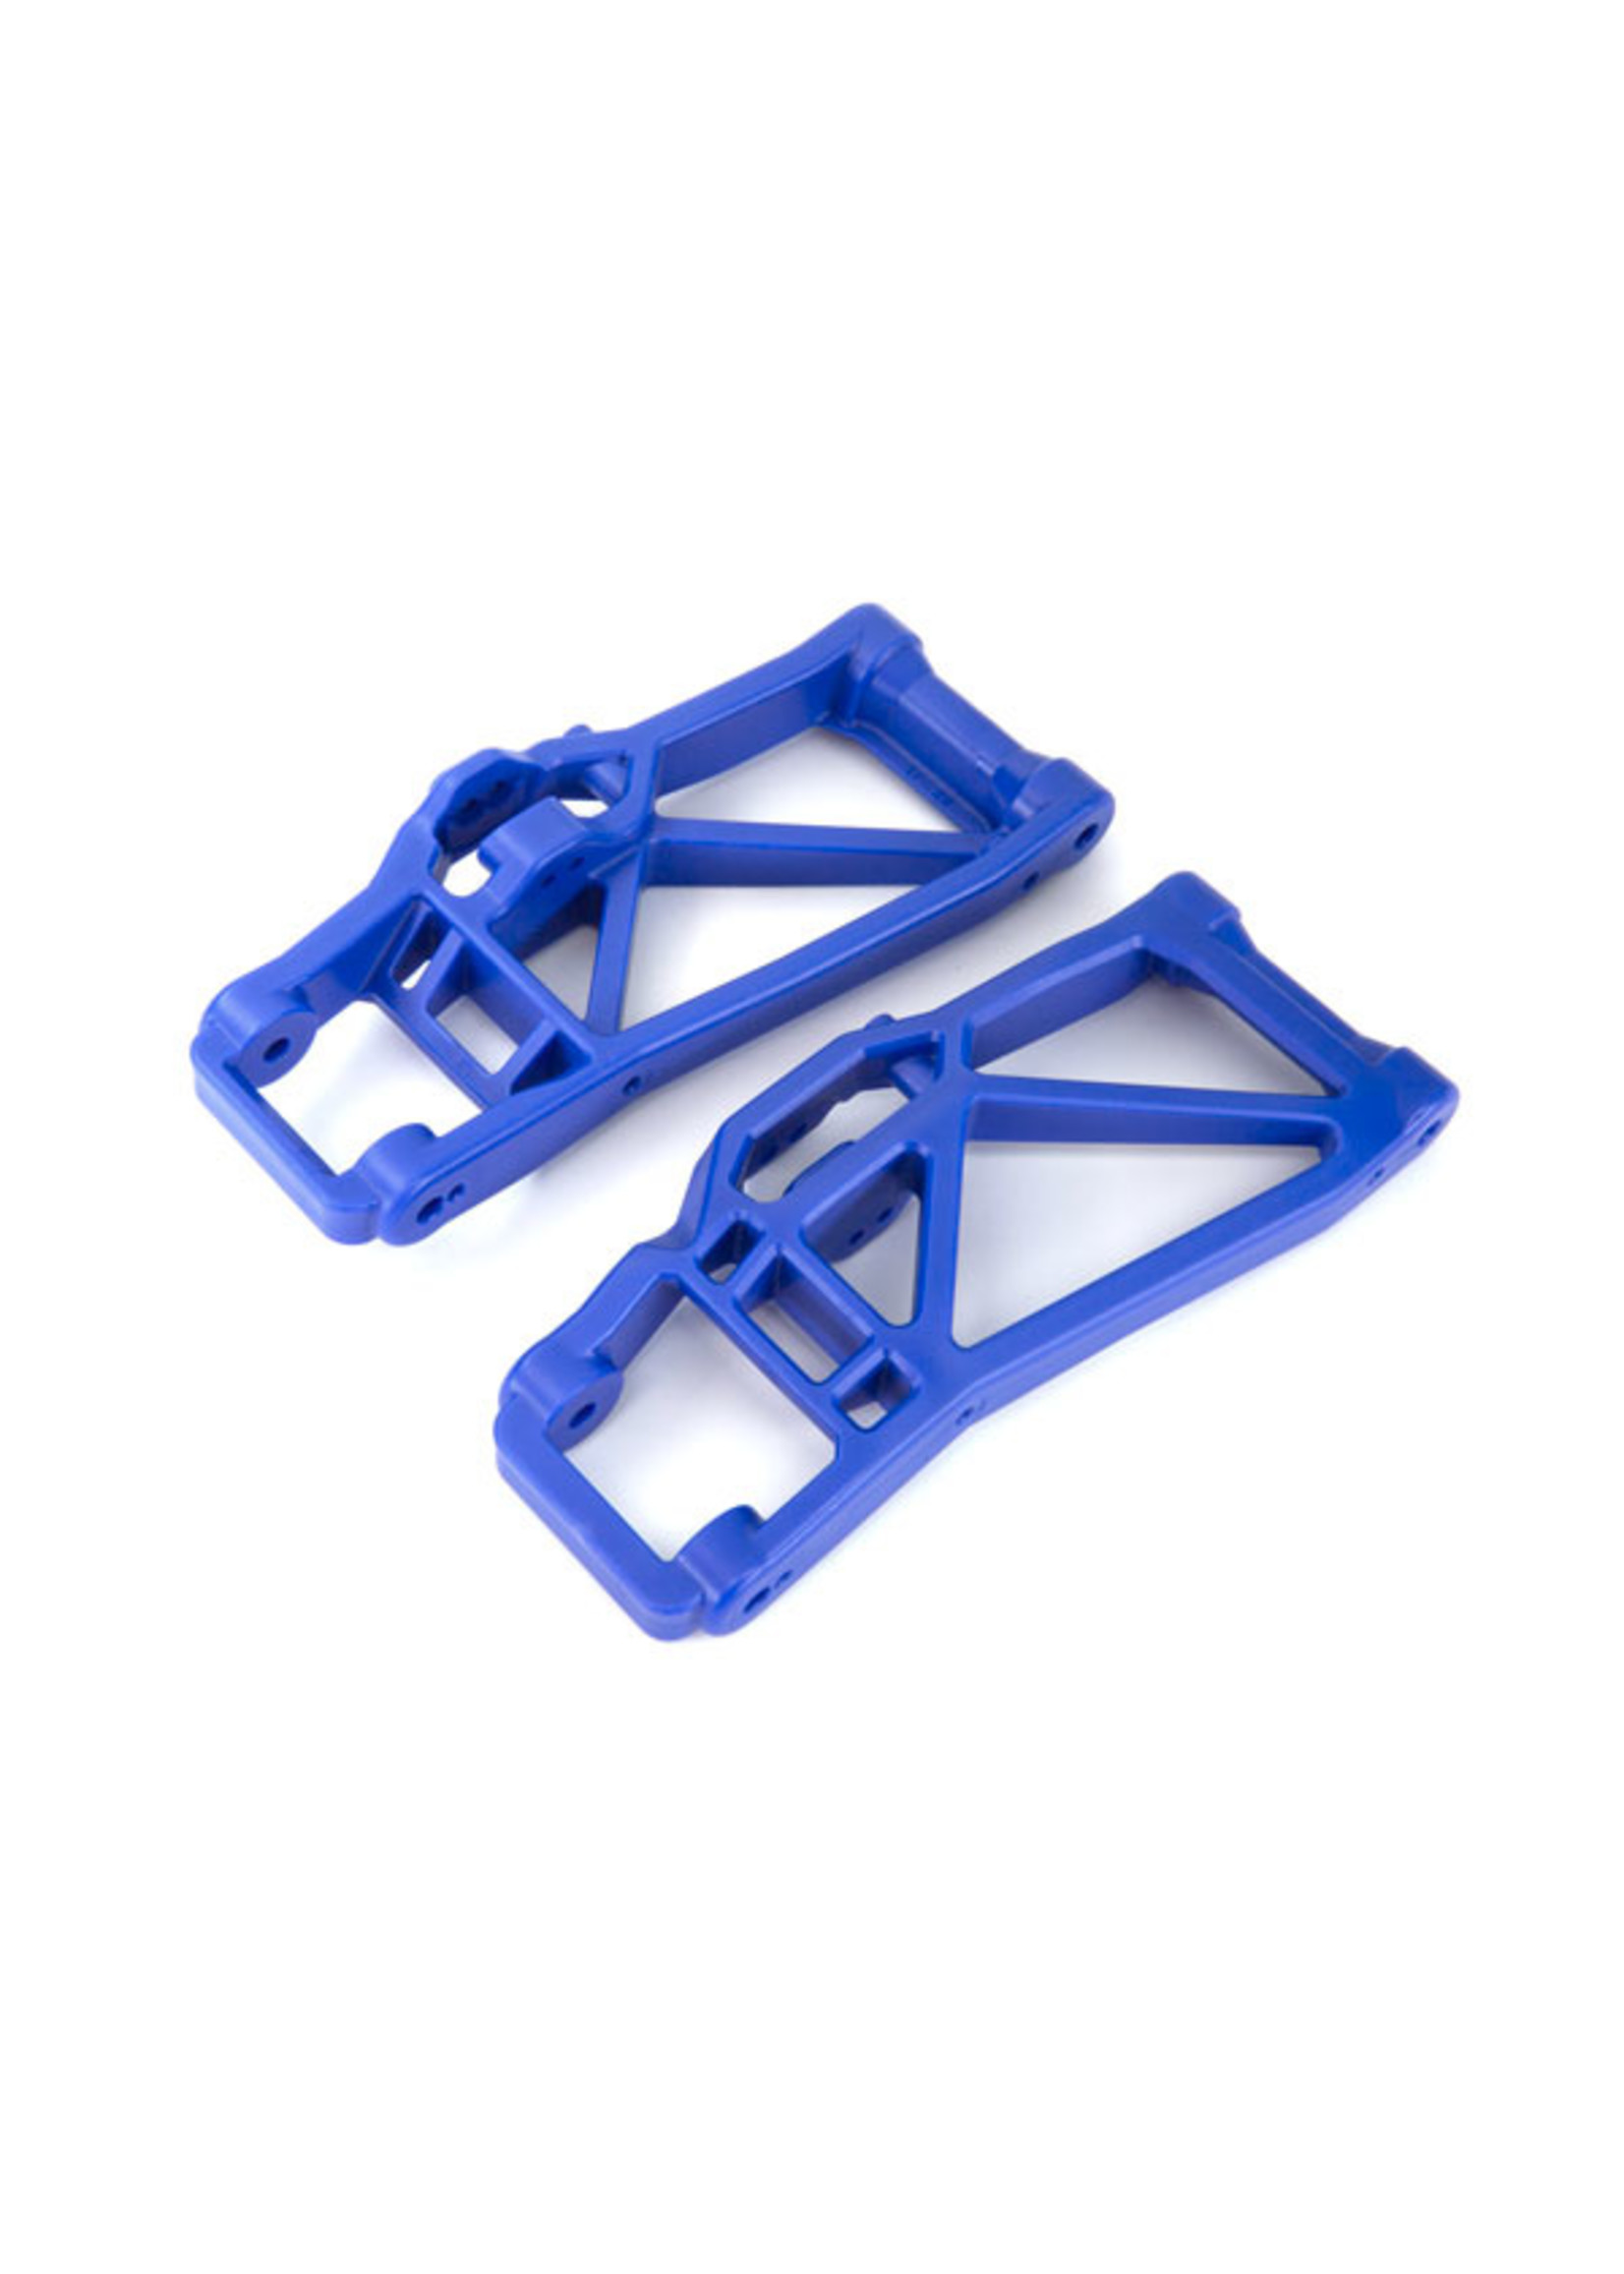 Traxxas 8930X - Lower Suspension Arms - Blue